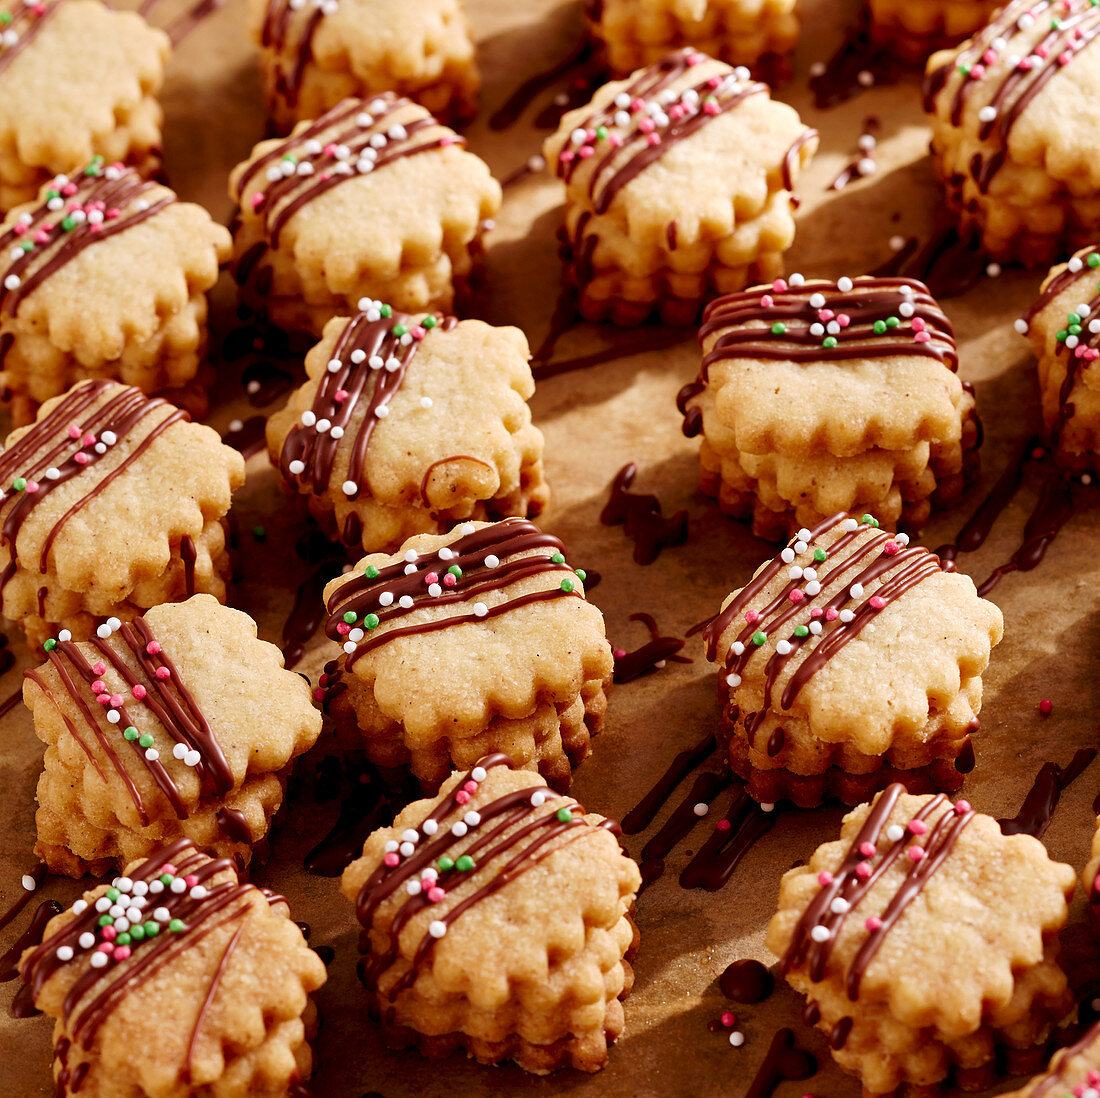 Christmas biscuits with chocolate stripes and sugar sprinkles